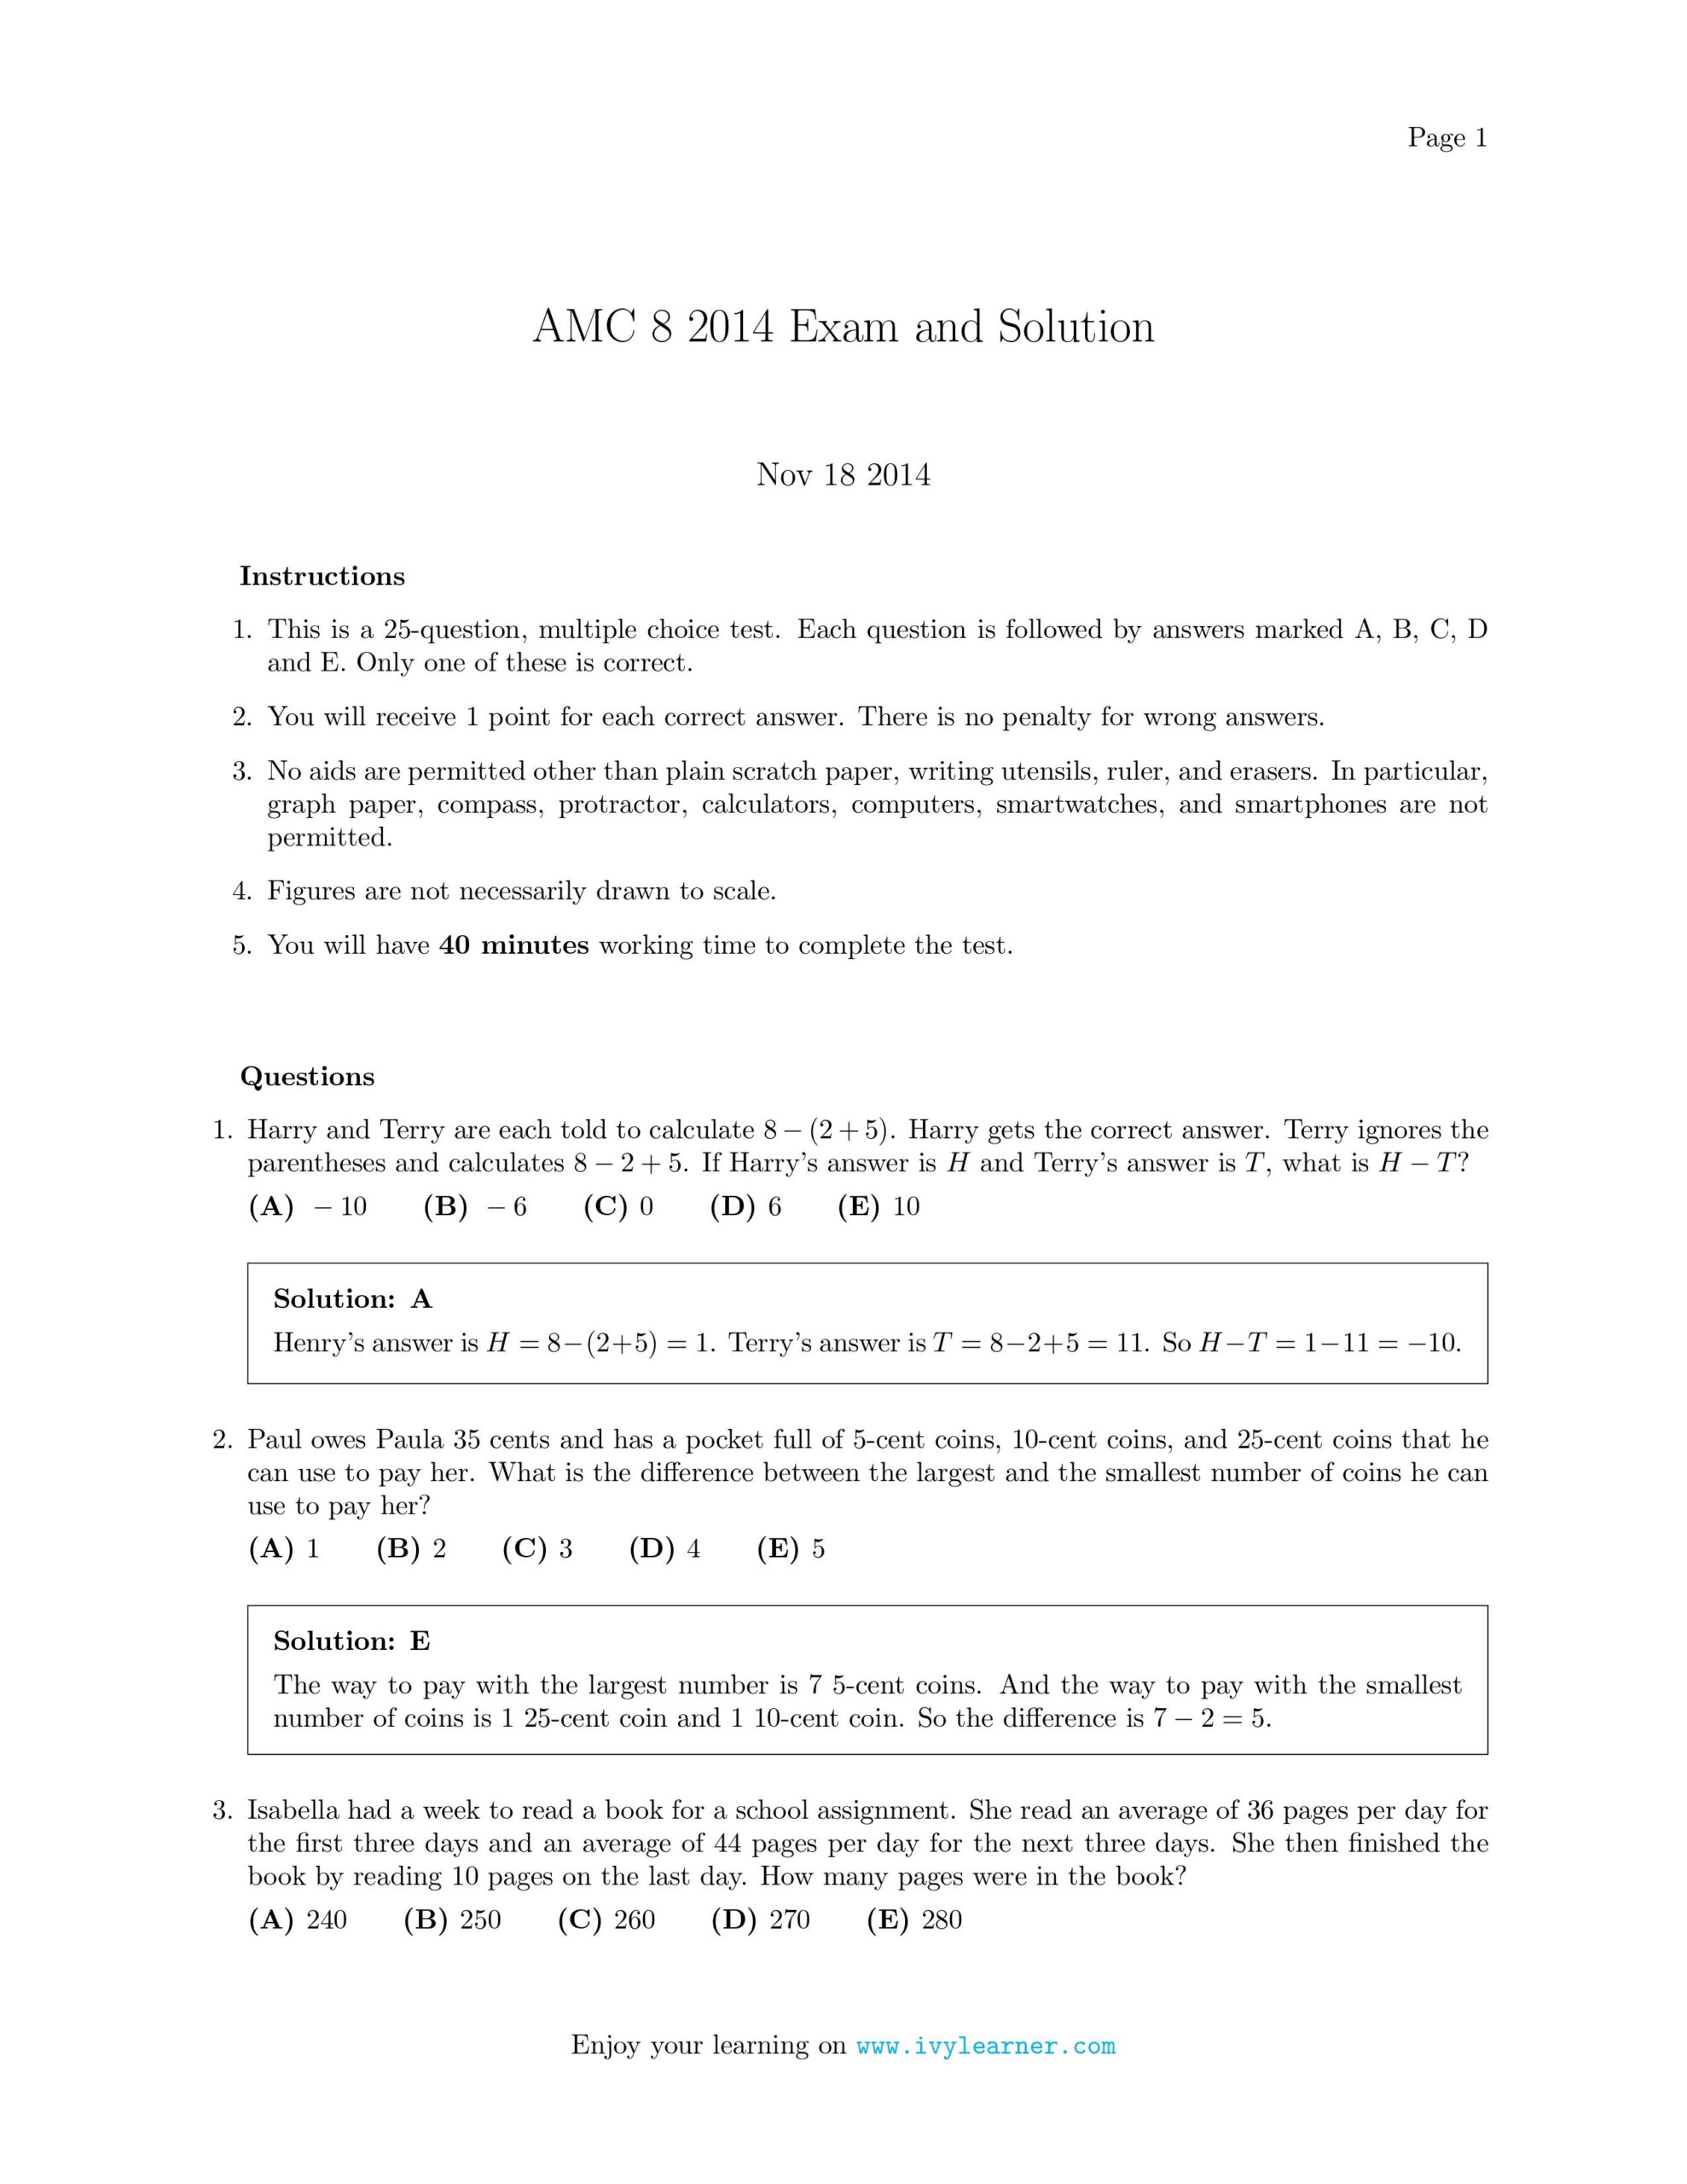 AMC 8 2014 Exam and Solution Ivy Learner